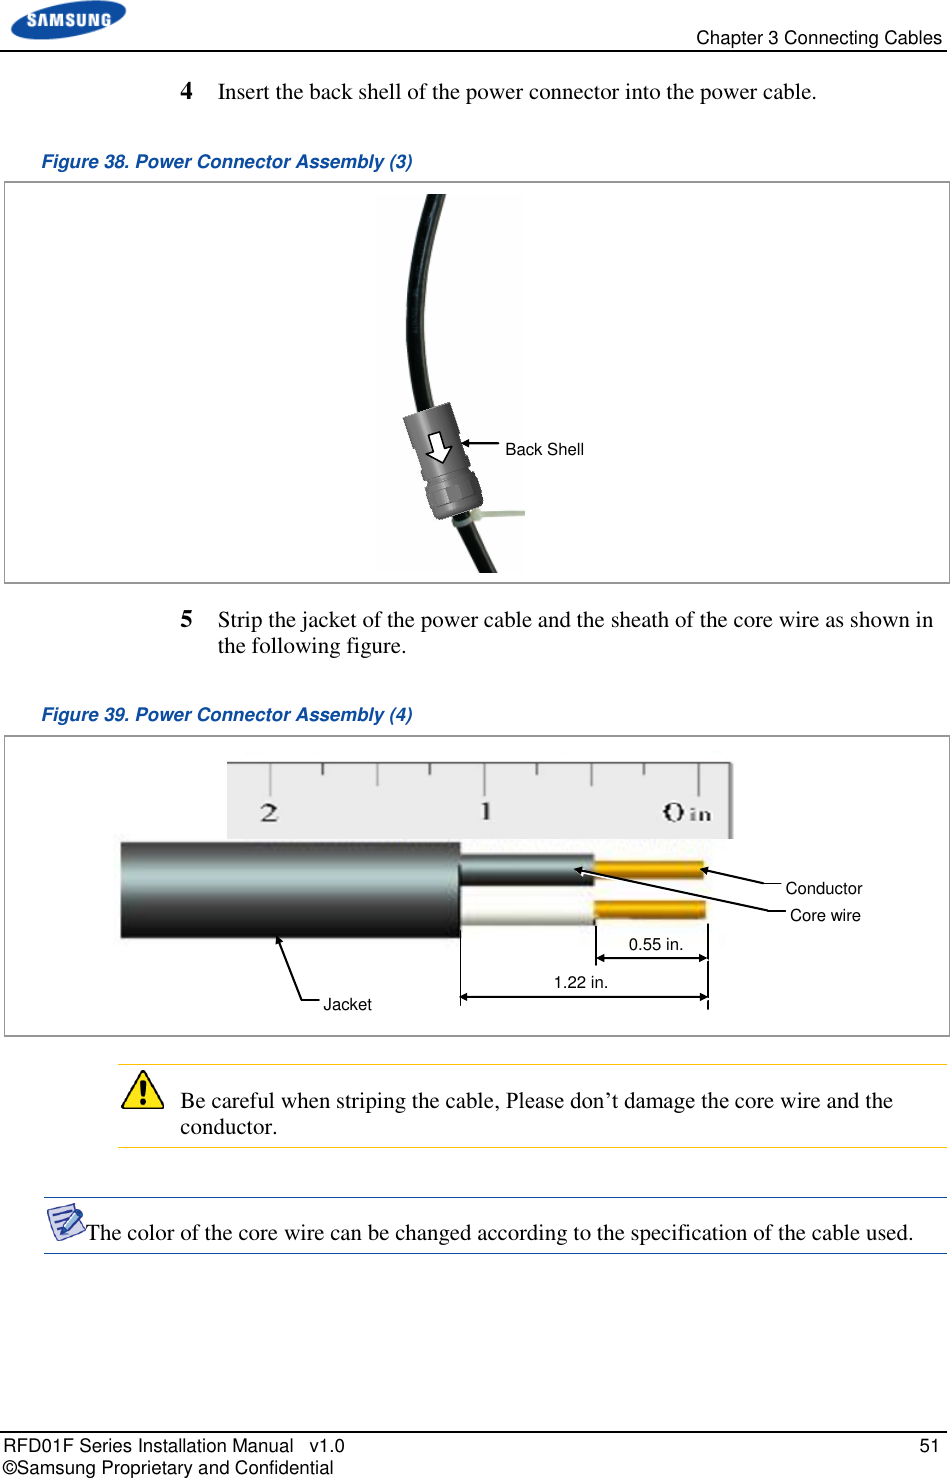   Chapter 3 Connecting Cables RFD01F Series Installation Manual   v1.0   51 © Samsung Proprietary and Confidential 4  Insert the back shell of the power connector into the power cable. Figure 38. Power Connector Assembly (3)  5  Strip the jacket of the power cable and the sheath of the core wire as shown in the following figure. Figure 39. Power Connector Assembly (4)    Be careful when striping the cable, Please don’t damage the core wire and the conductor.  The color of the core wire can be changed according to the specification of the cable used.    Rubber Tube Jacket 1.22 in. Conductor Core wire 0.55 in. Back Shell 